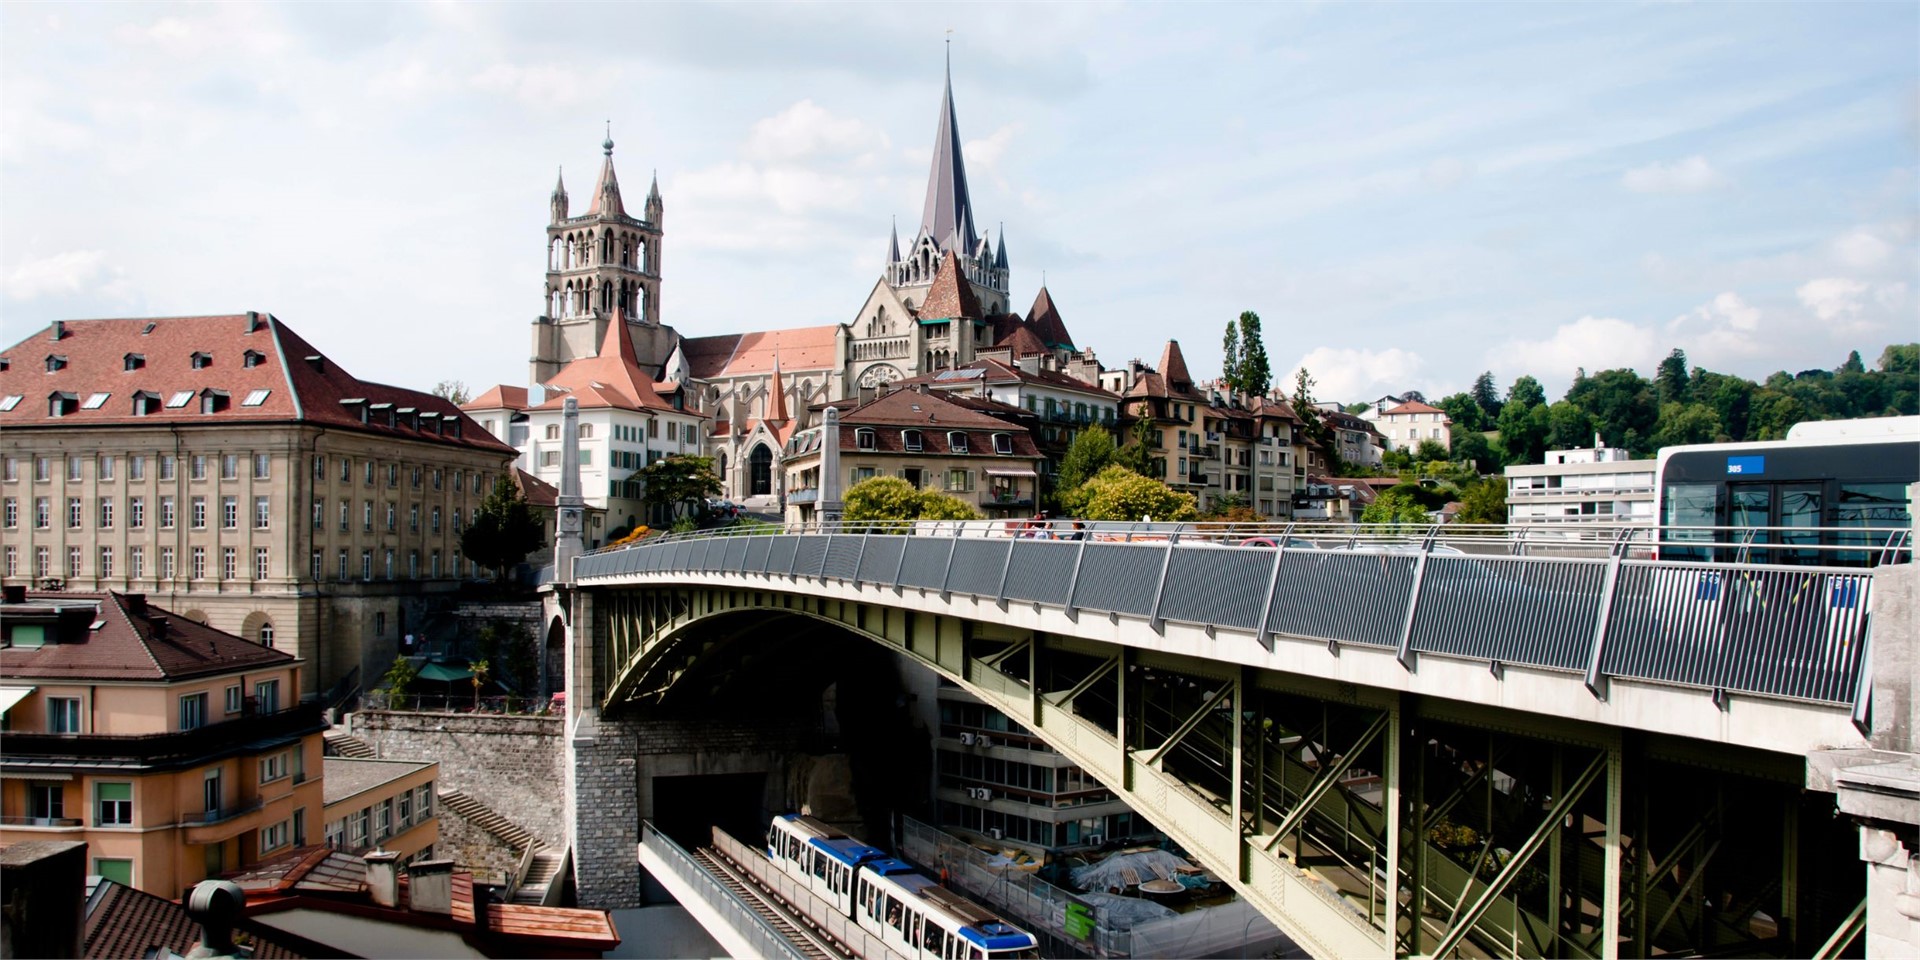 Hotels and accommodation in Lausanne, Switzerland
